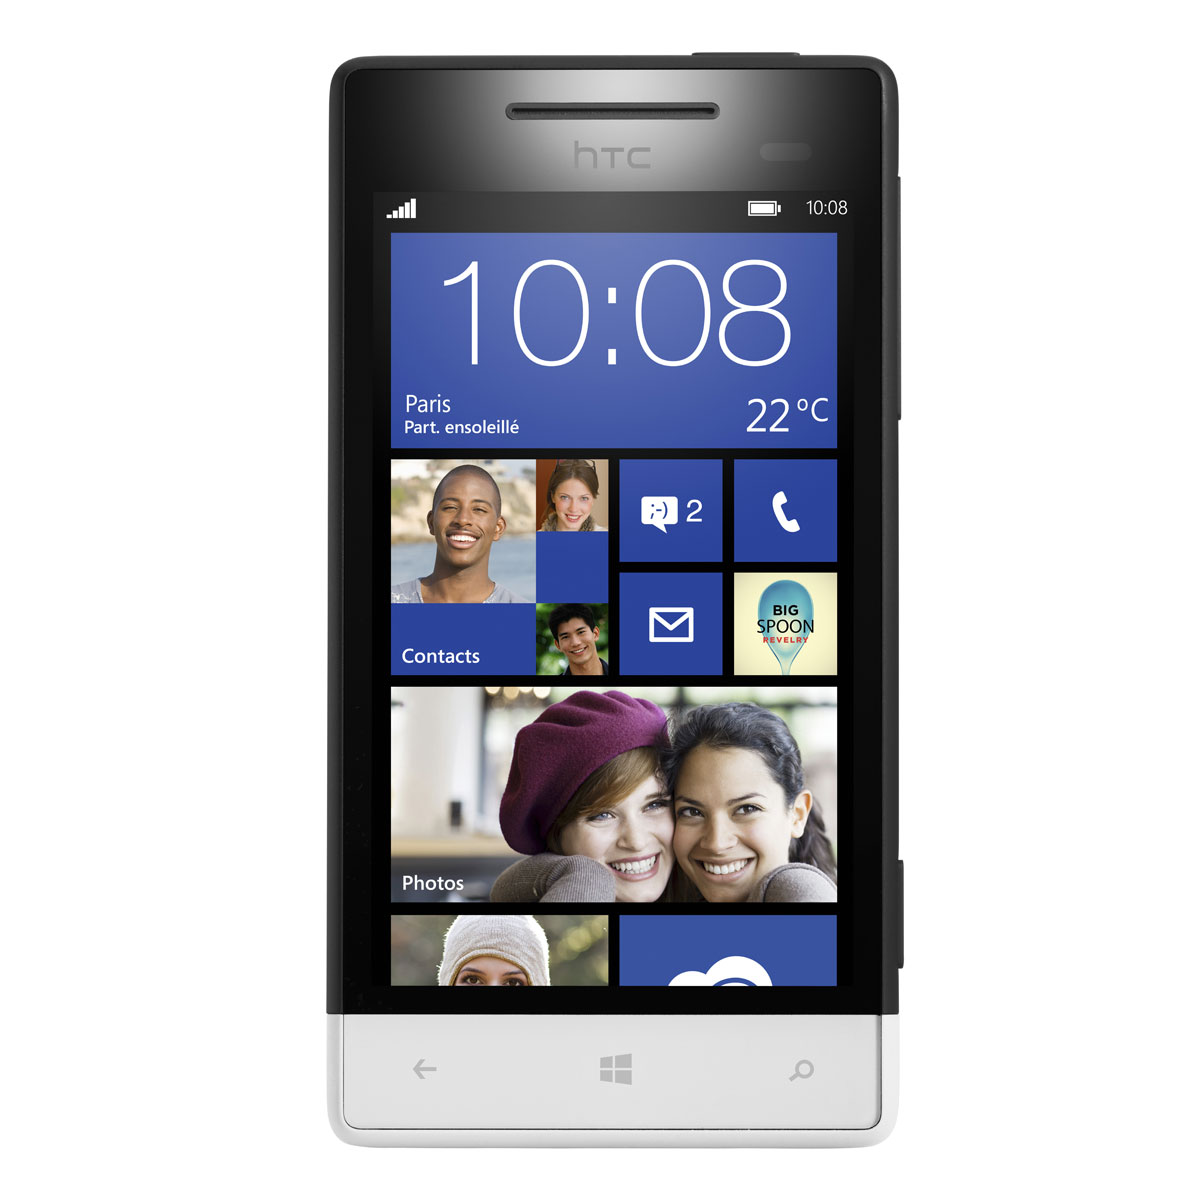 install android on htc windows phone 8s windows